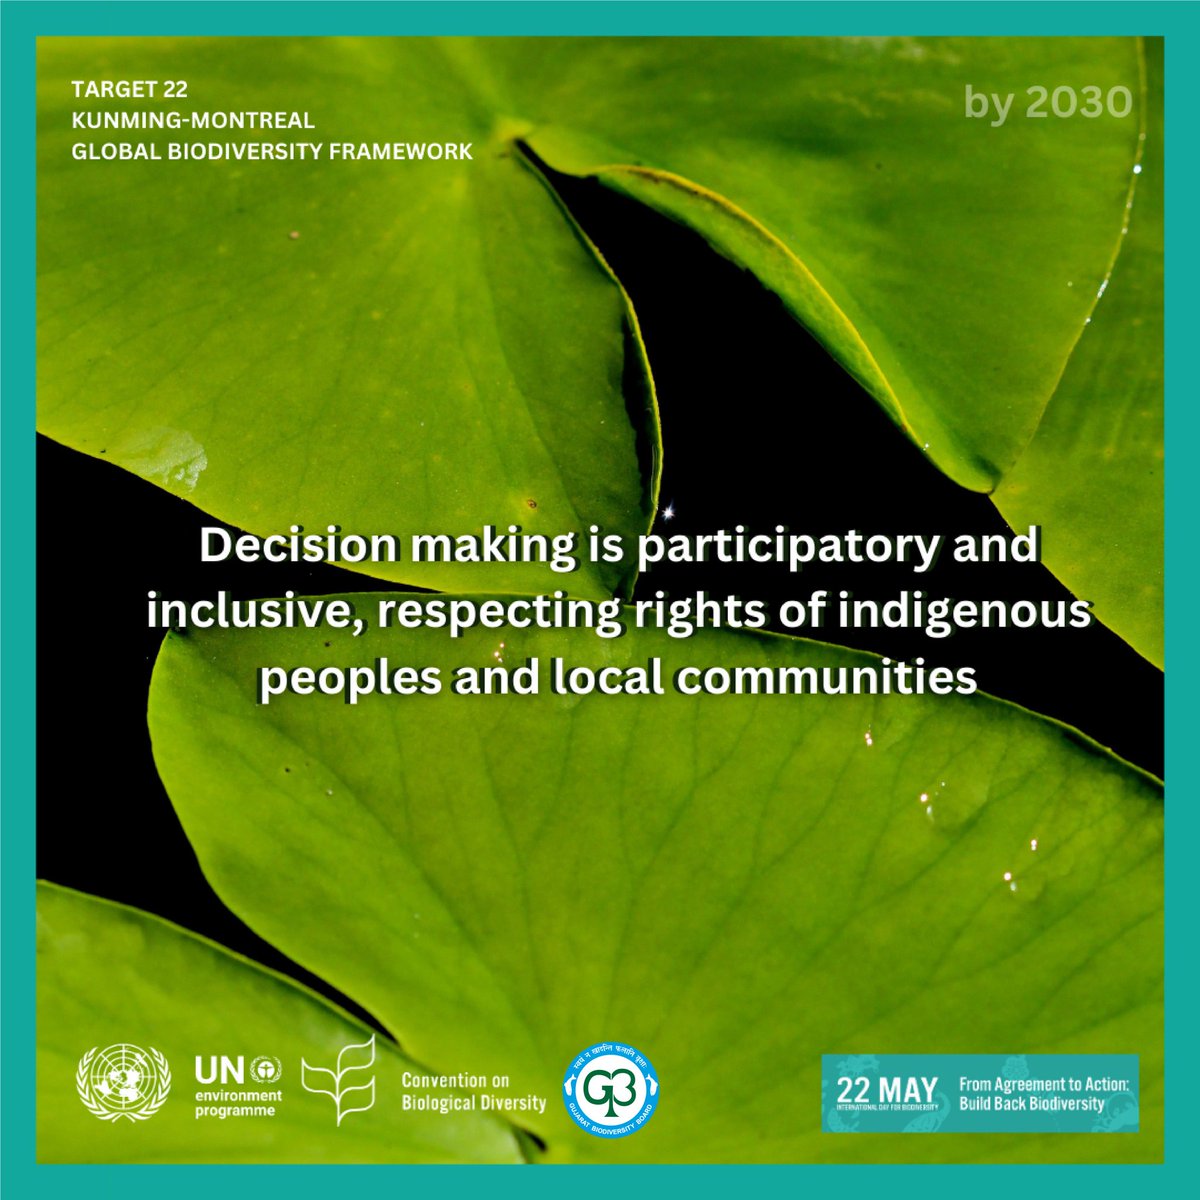 The Kunming-Montreal Global Biodiversity Framework was adopted in December 2022.. but how do we go #FromAgreementToAction?    As we get closer to #BiodiversityDay, you can learn about #biodiversity 🌿& the #KMGBF by reading about the targets & goals:  cbd.int/gbf/